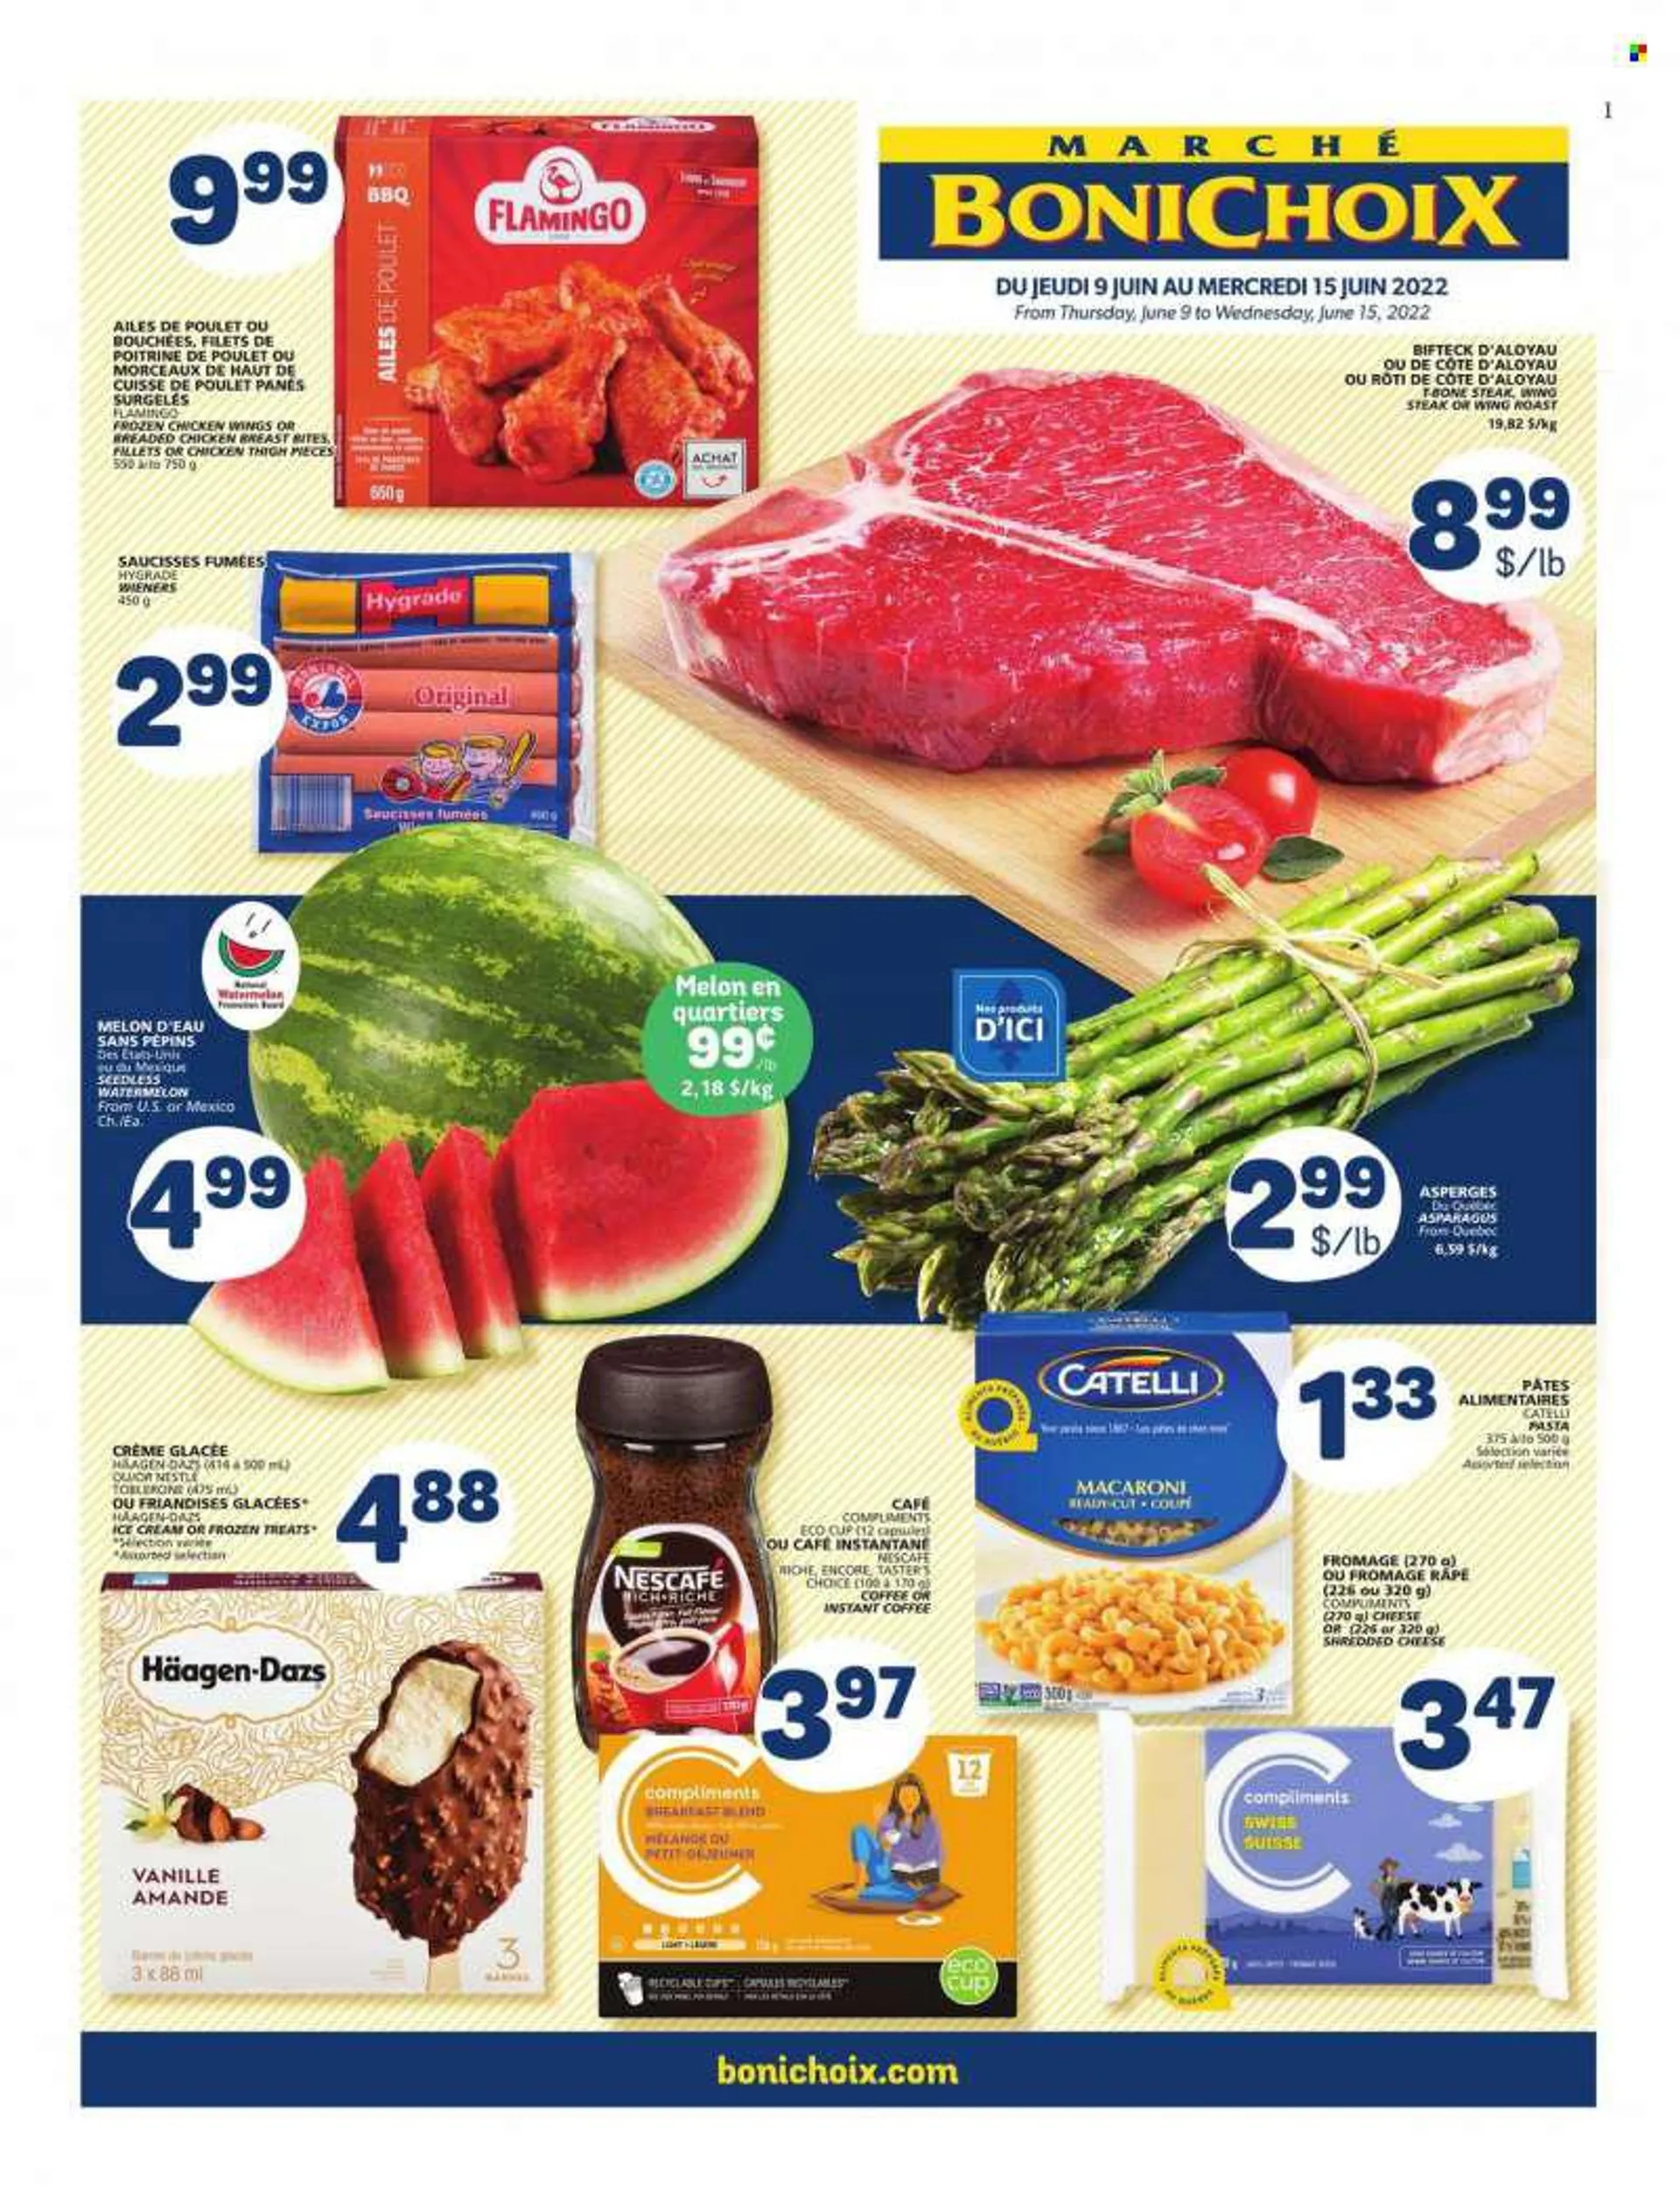 Marché Bonichoix Flyer - June 09, 2022 - June 15, 2022 - Sales products - asparagus, watermelon, melons, macaroni, pasta, fried chicken, shredded cheese, ice cream, Häagen-Dazs, chicken wings, Toblerone, instant coffee, arabica beans, breakfast blend, chi